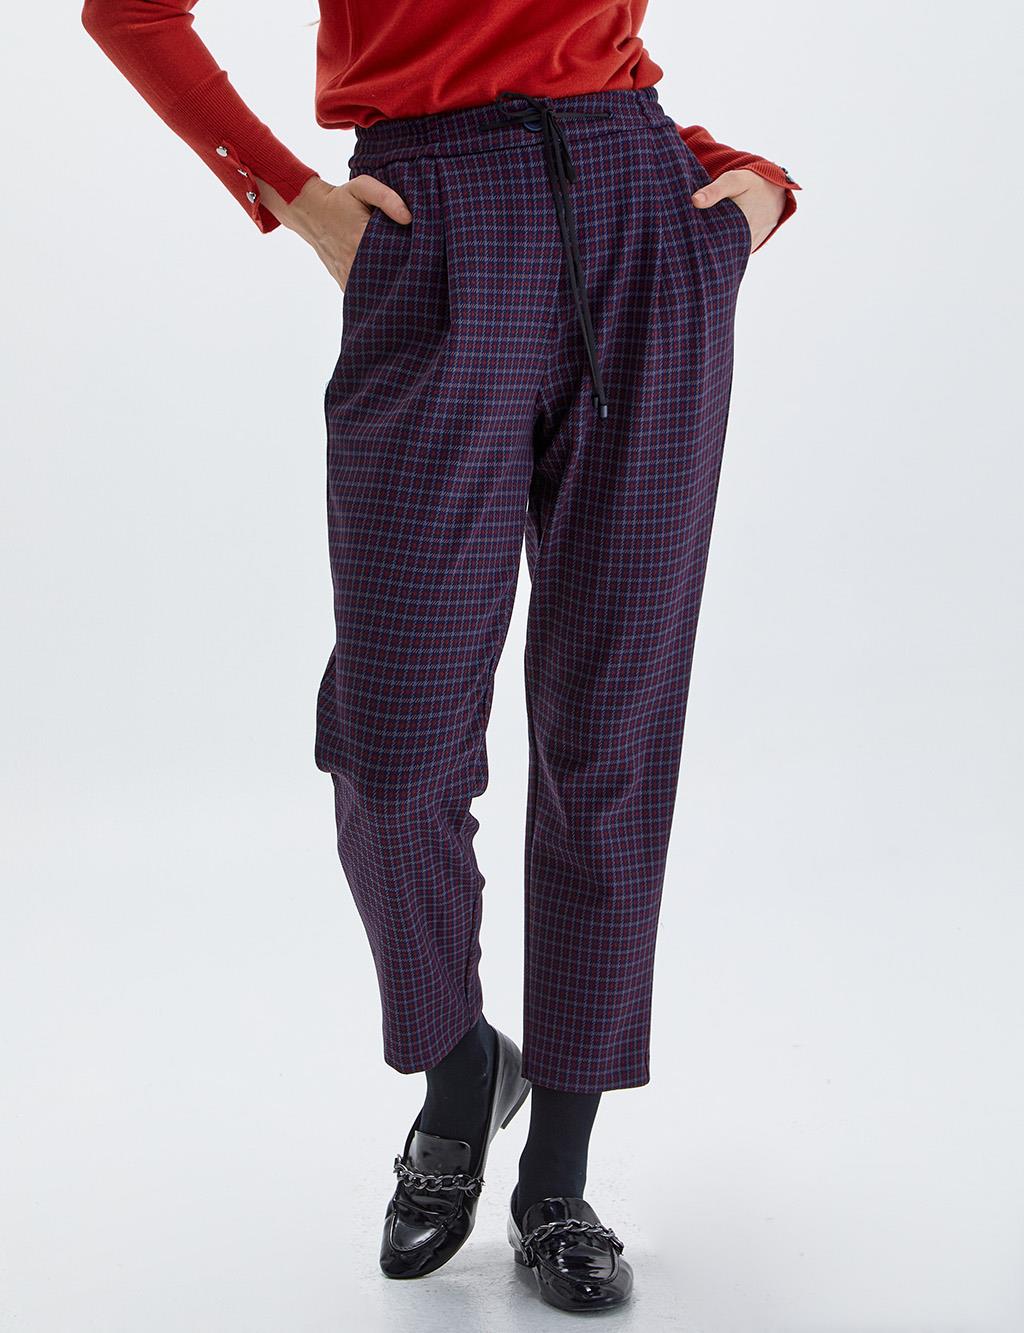 KYR Houndstooth Patterned Fabric Pants Claret Red